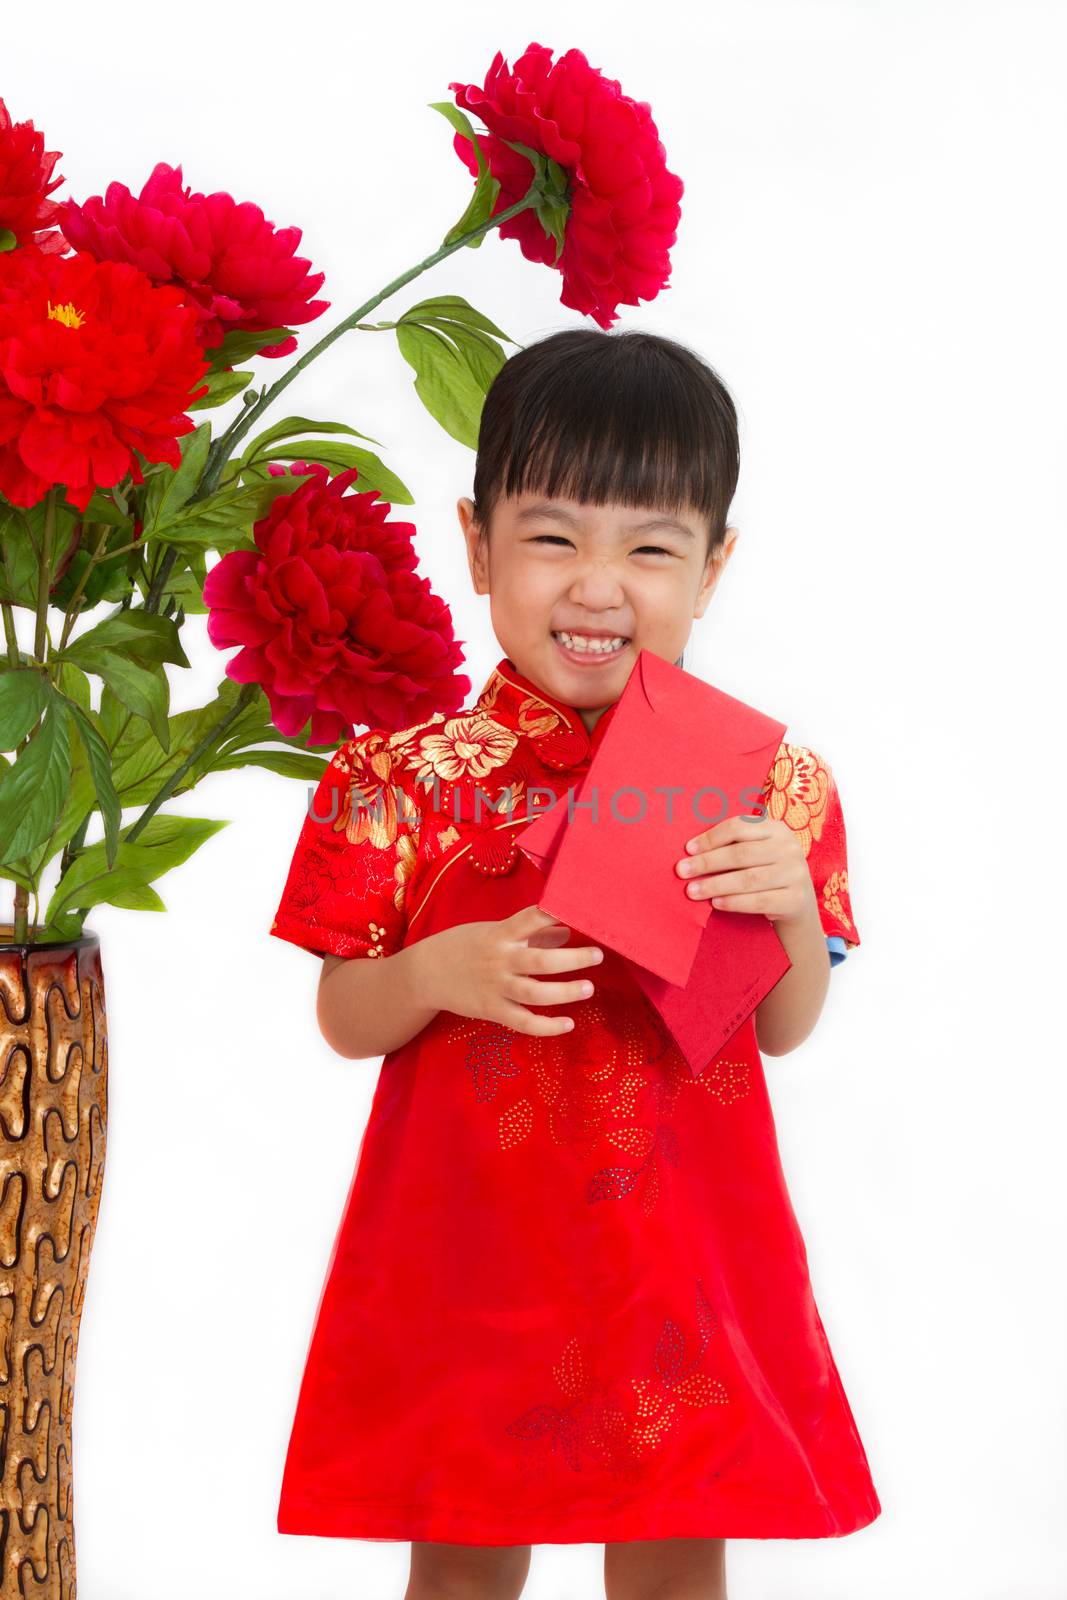 Chinese little girl holding red envelope by kiankhoon